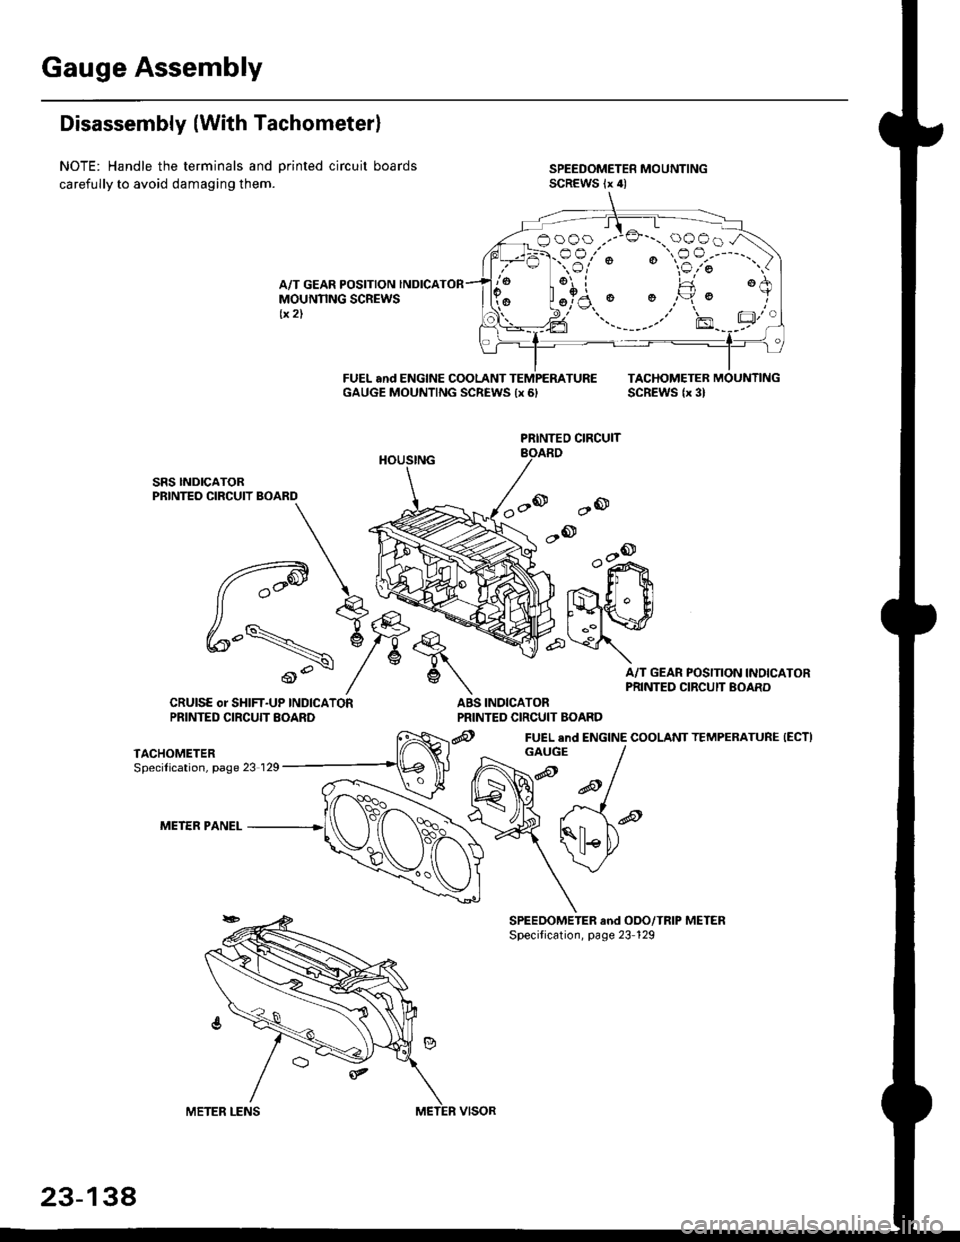 HONDA CIVIC 1996 6.G Workshop Manual Gauge Assembly
Disassembly (With Tachometerl
NOTE: Handle the terminals and Drinted circuit boards
carefully to avoid damaging them.
A/T GEAR POSITION INDICAMOUNNNG SCREWStx 2)
FUEL and ENGINE COOLANT